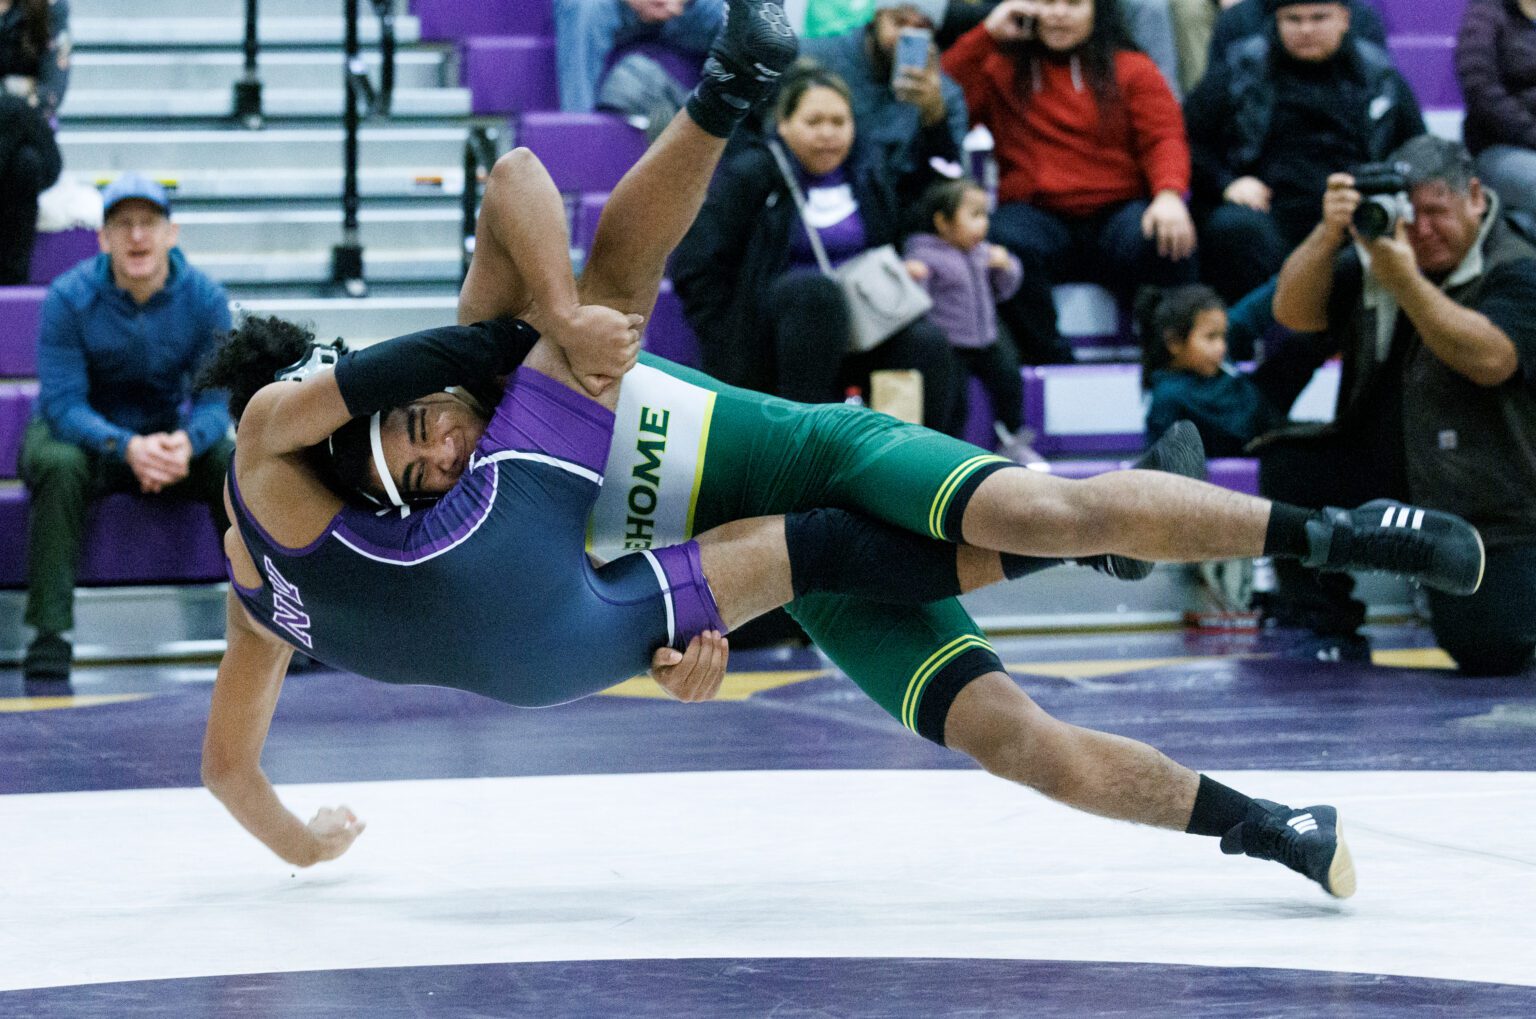 Sehome’s Pierson Lewis throws Nooksack Valley’s Gio Coleman to the mat as a crowd of spectators and photographers watch from the sidelines.